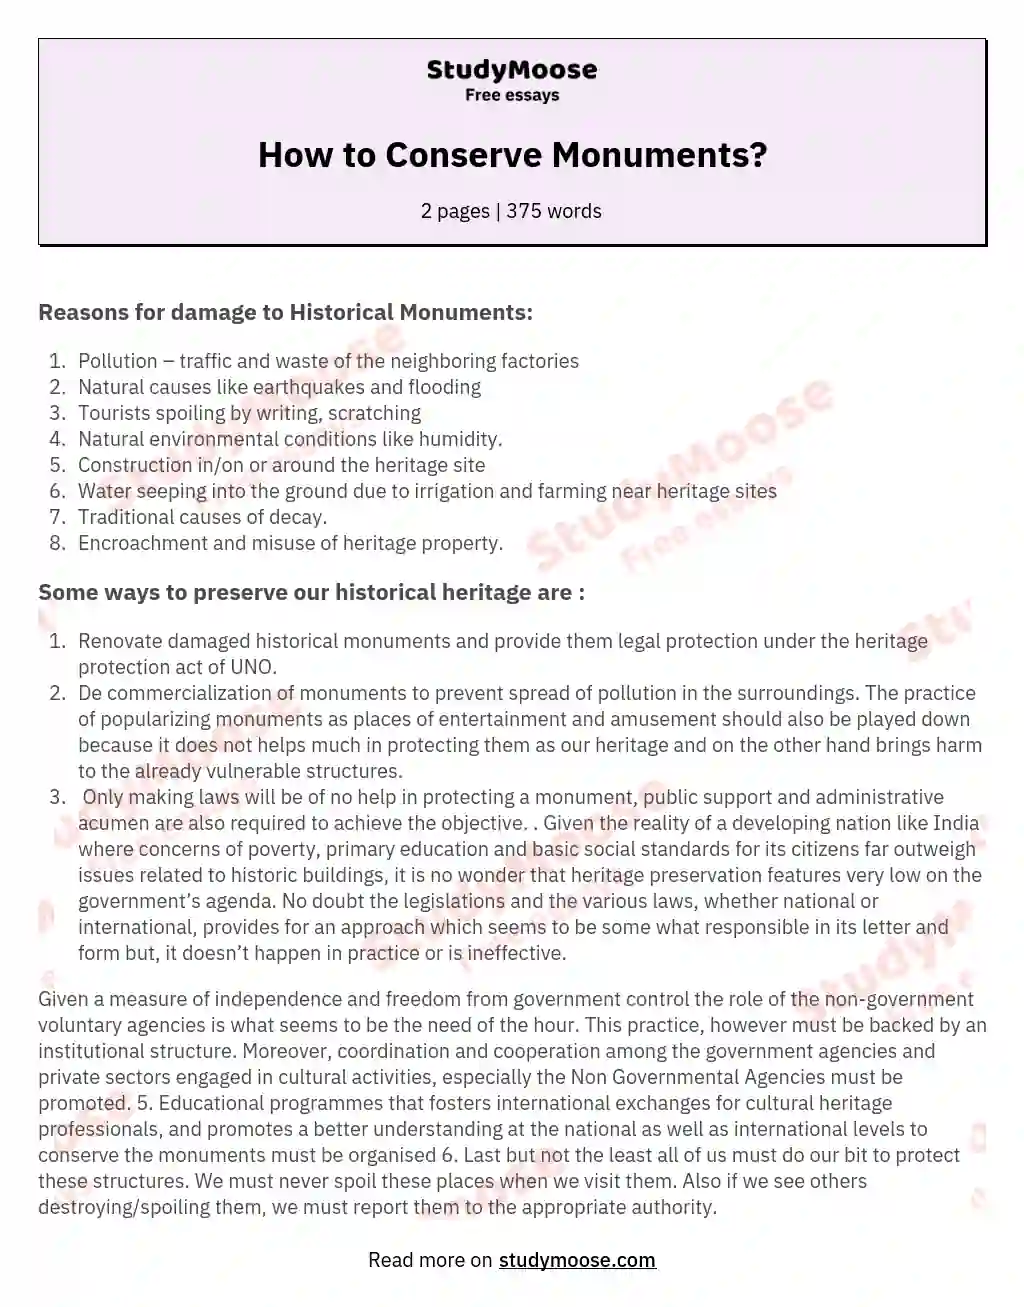 How to Conserve Monuments?